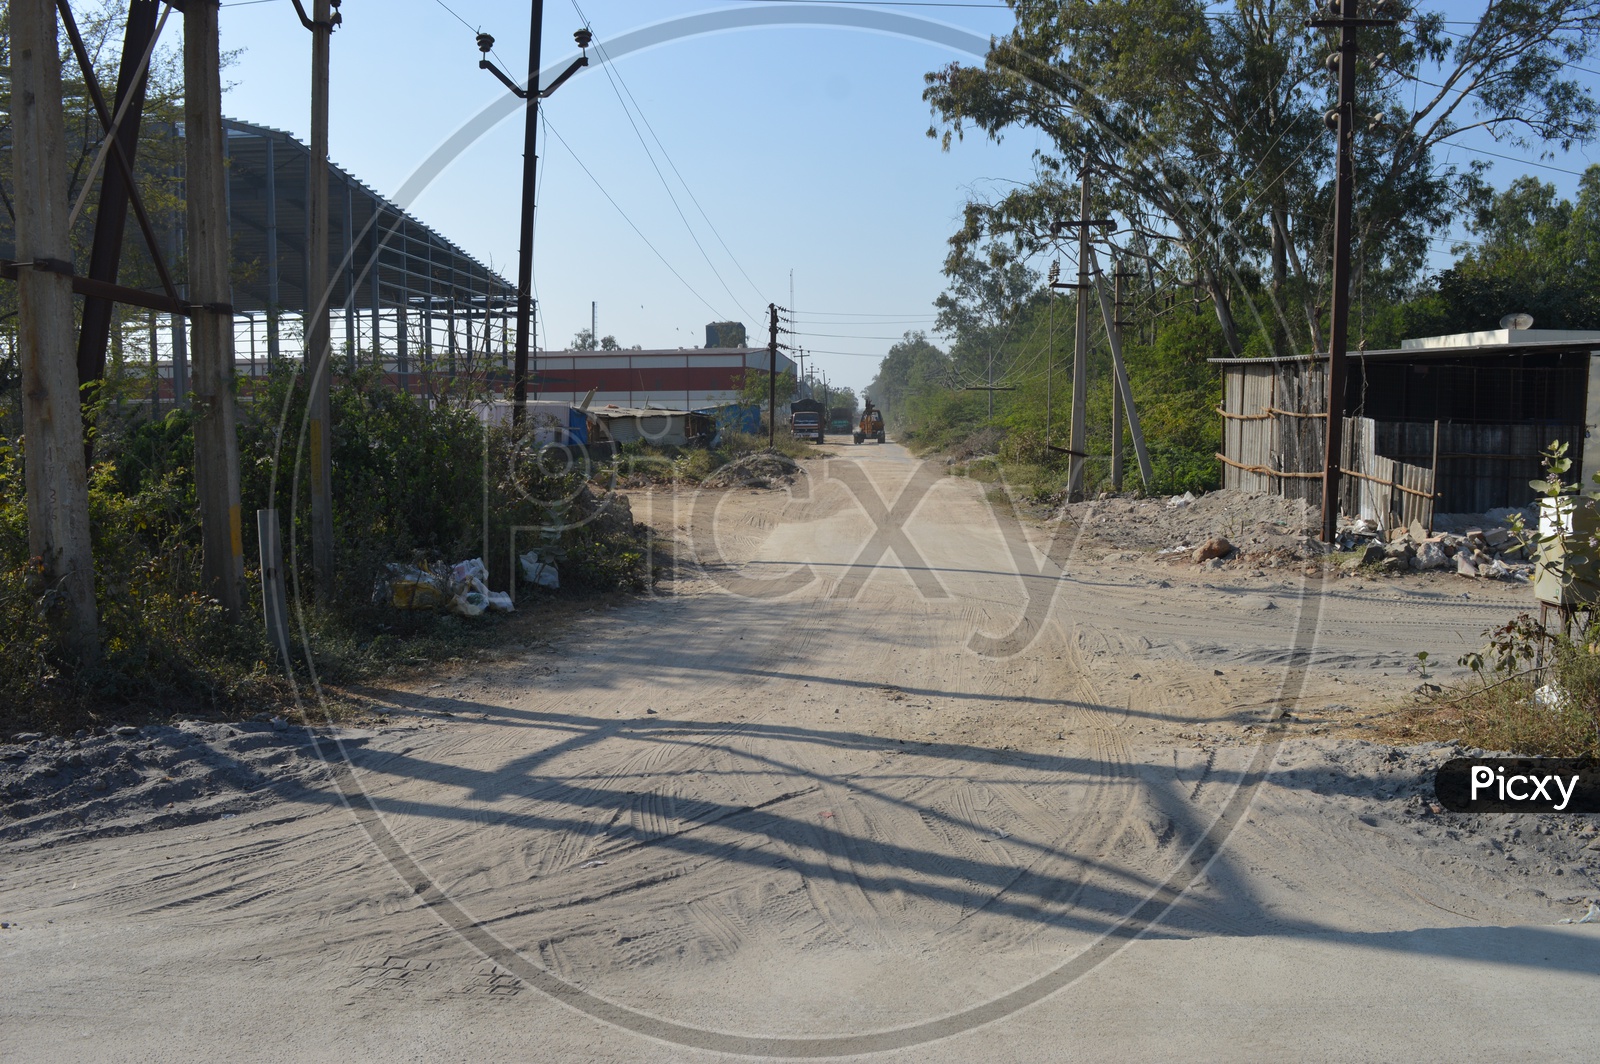 Sand Roads In City Outskirts